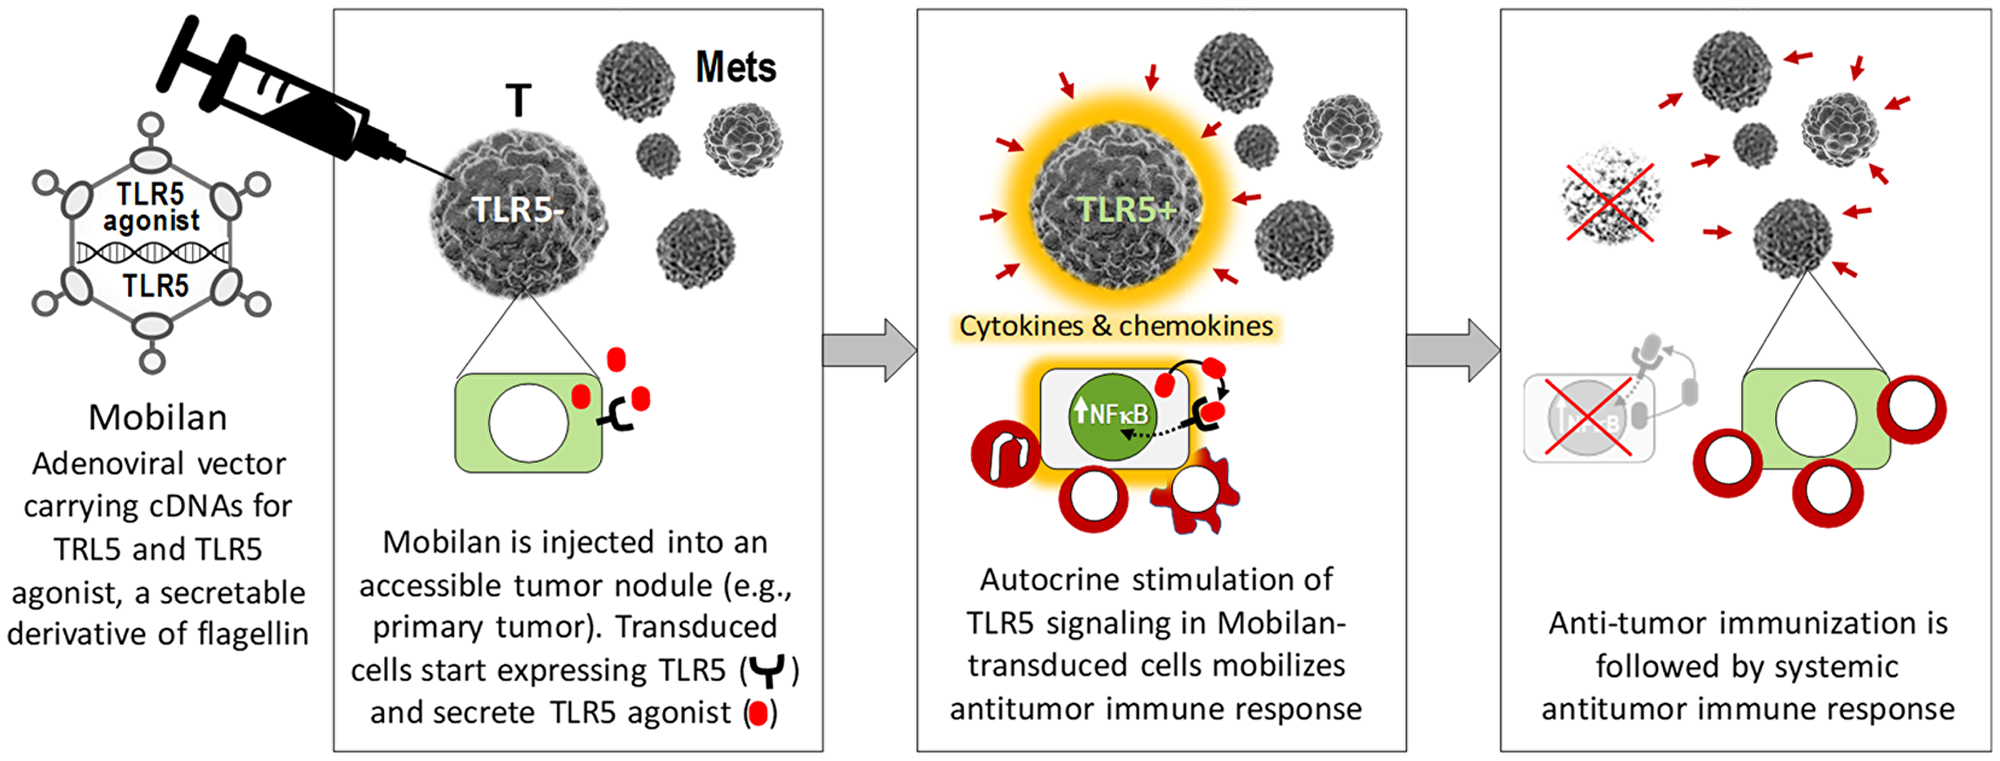 Figure 1: Schematic illustration of the mechanism of action of Mobilan resulting in activation of antitumor immune responses.